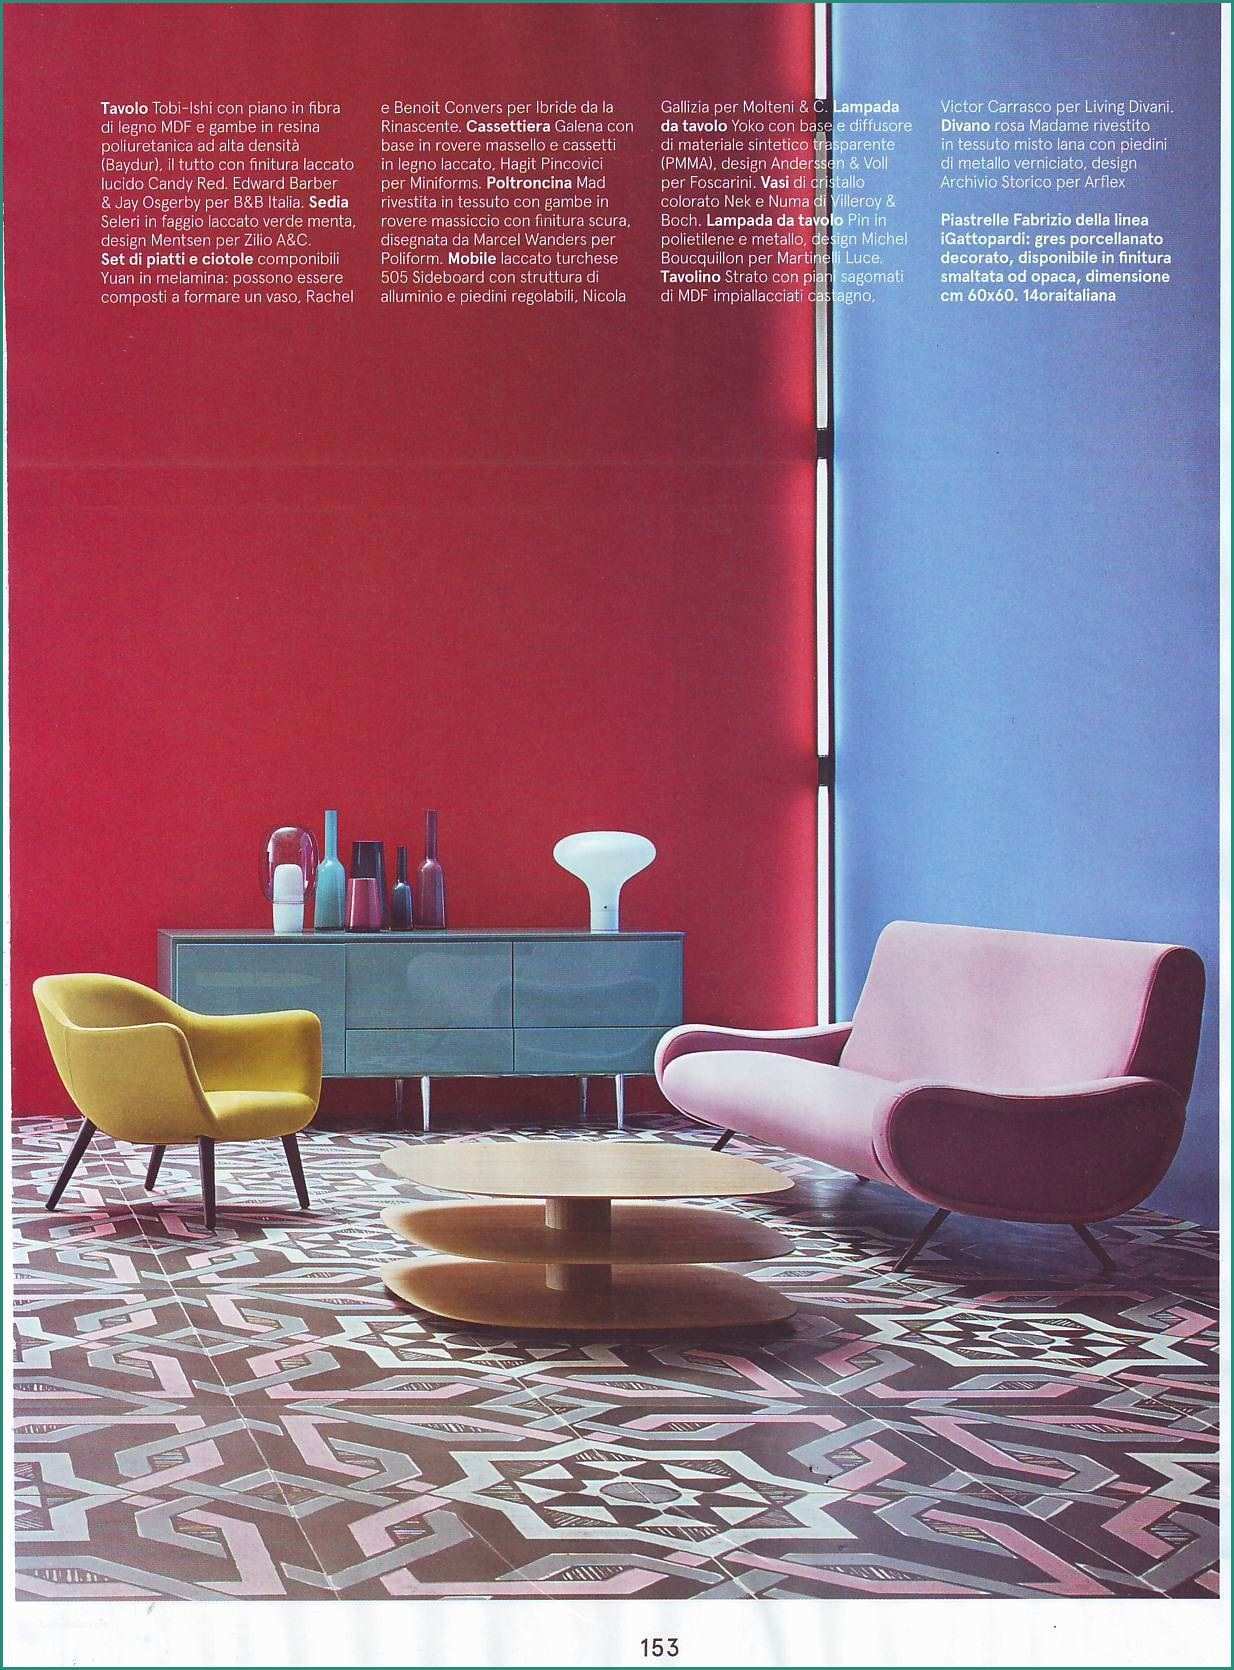 Lampade Design Outlet E Pin Table Lamp by Michel Boucquillon Seen On "living" Magazine